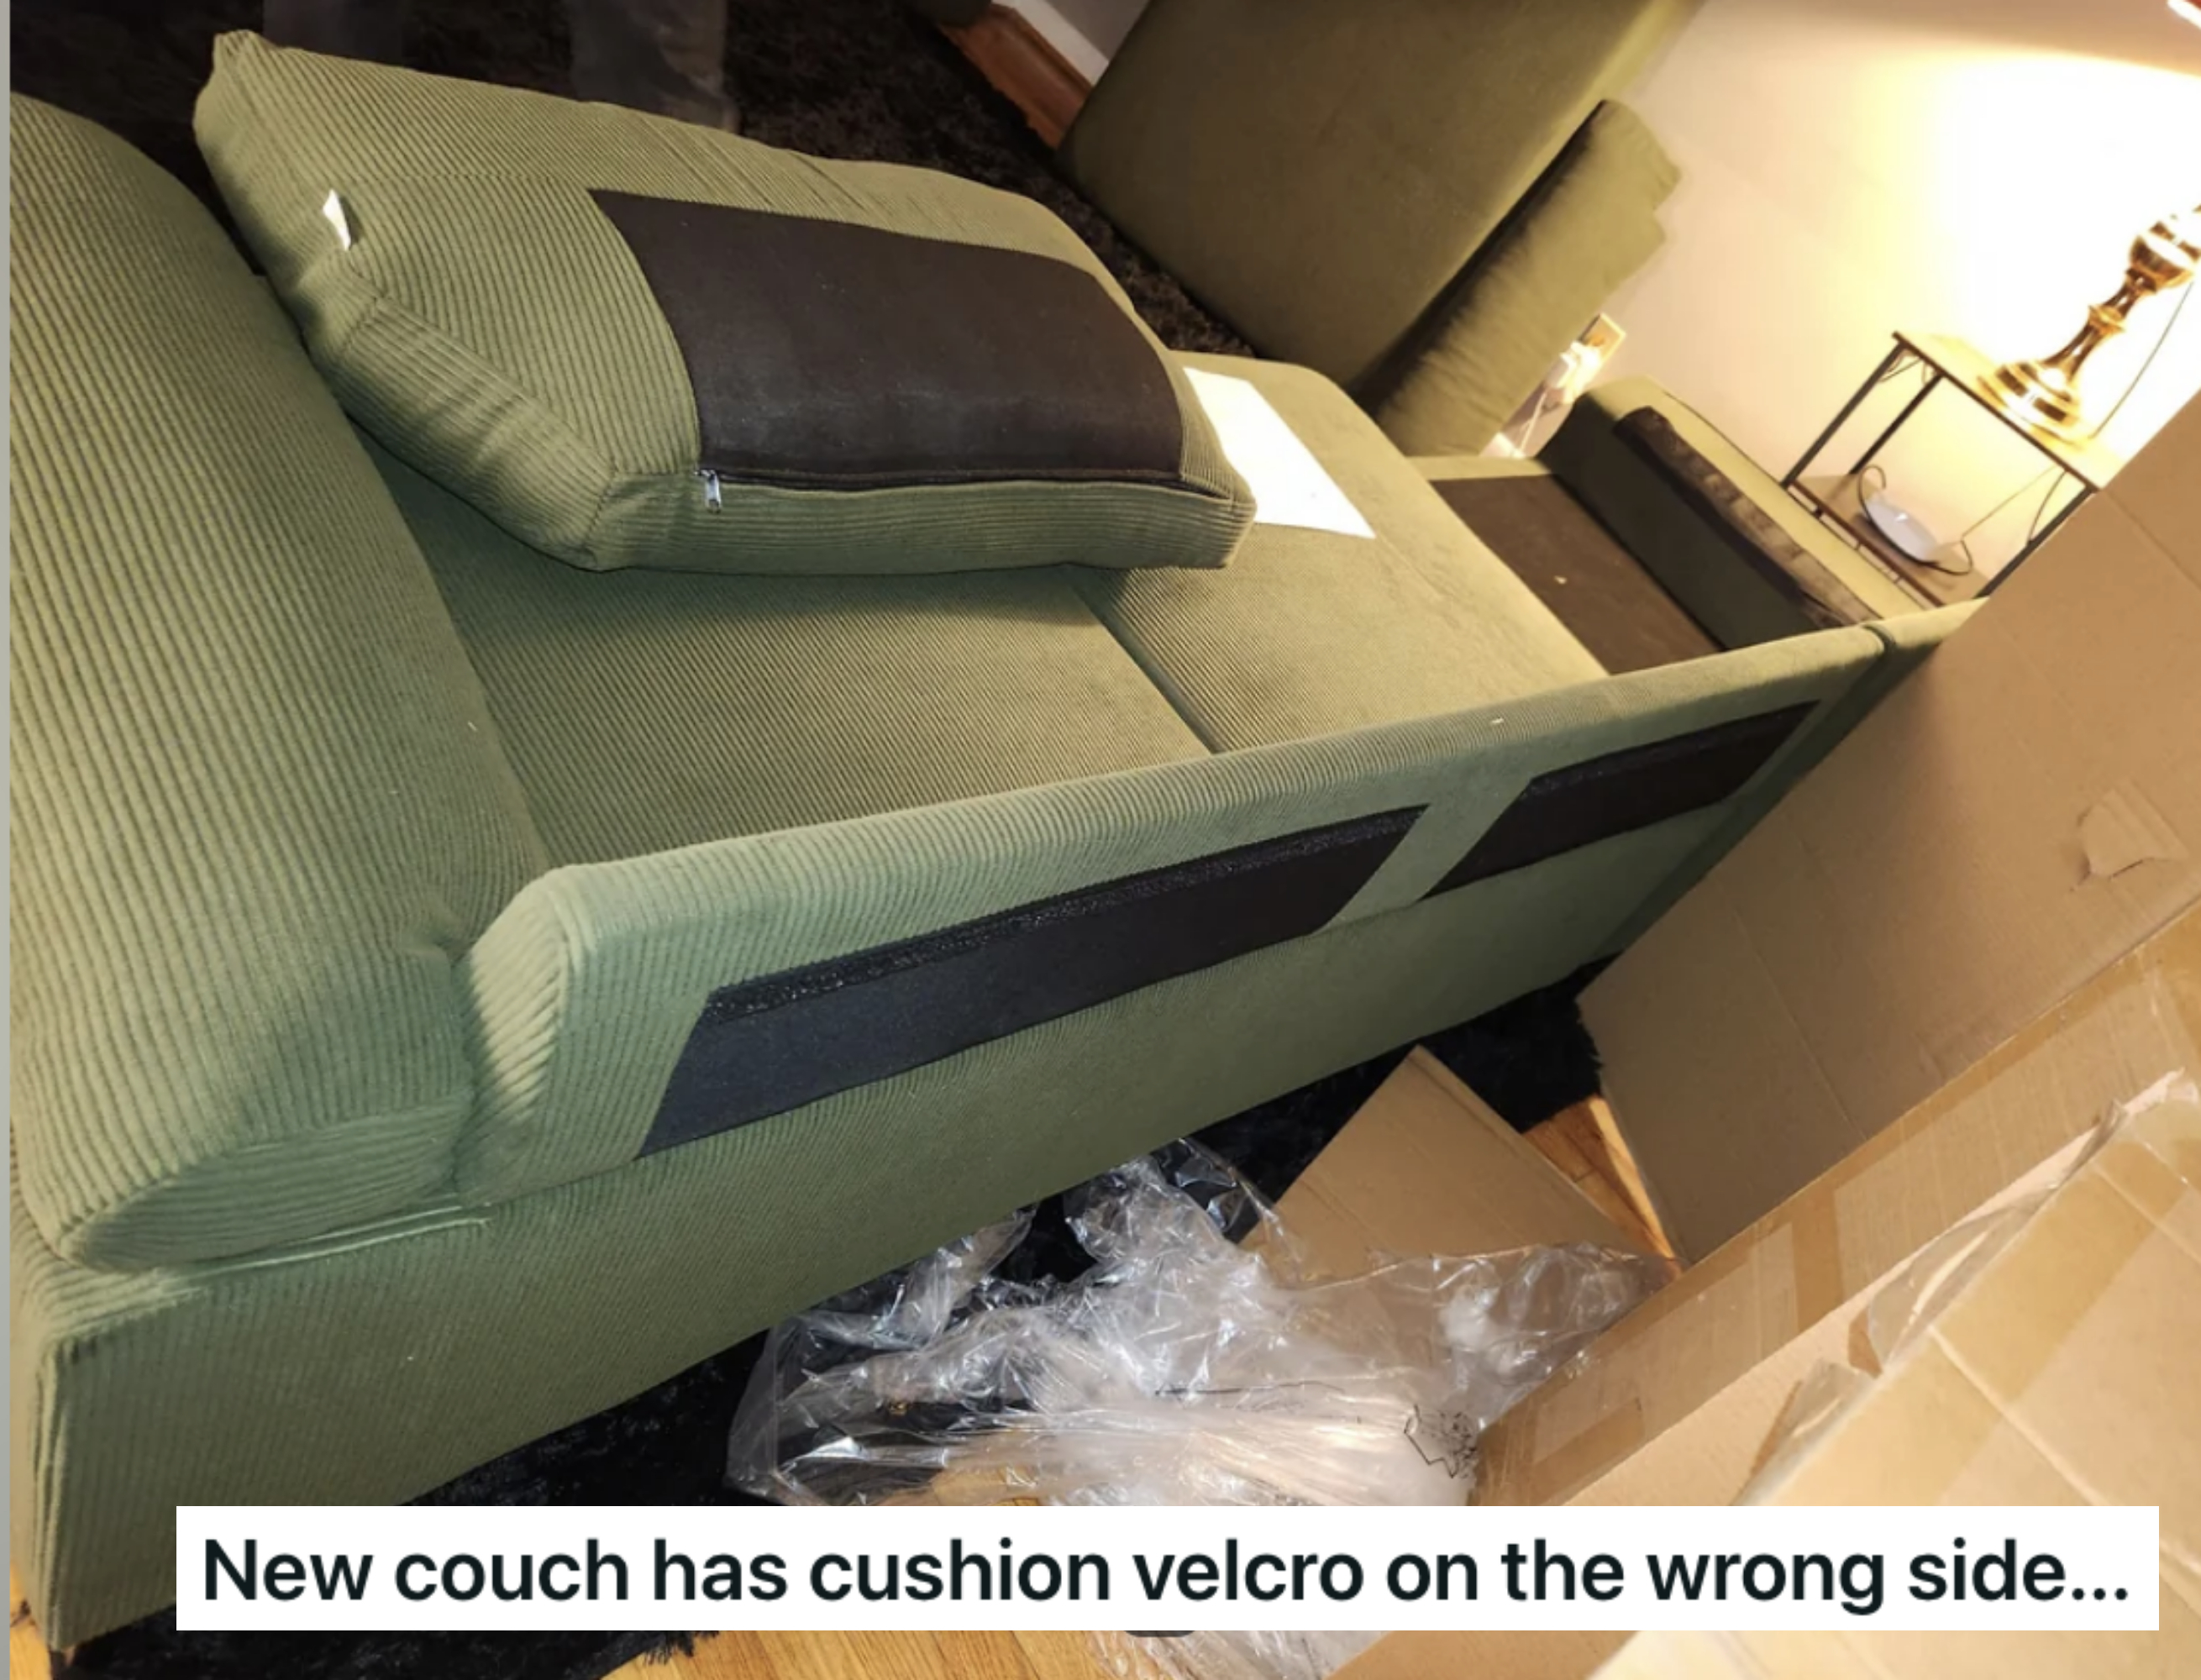 &quot;New couch has cushion velcro on the wrong side&quot;